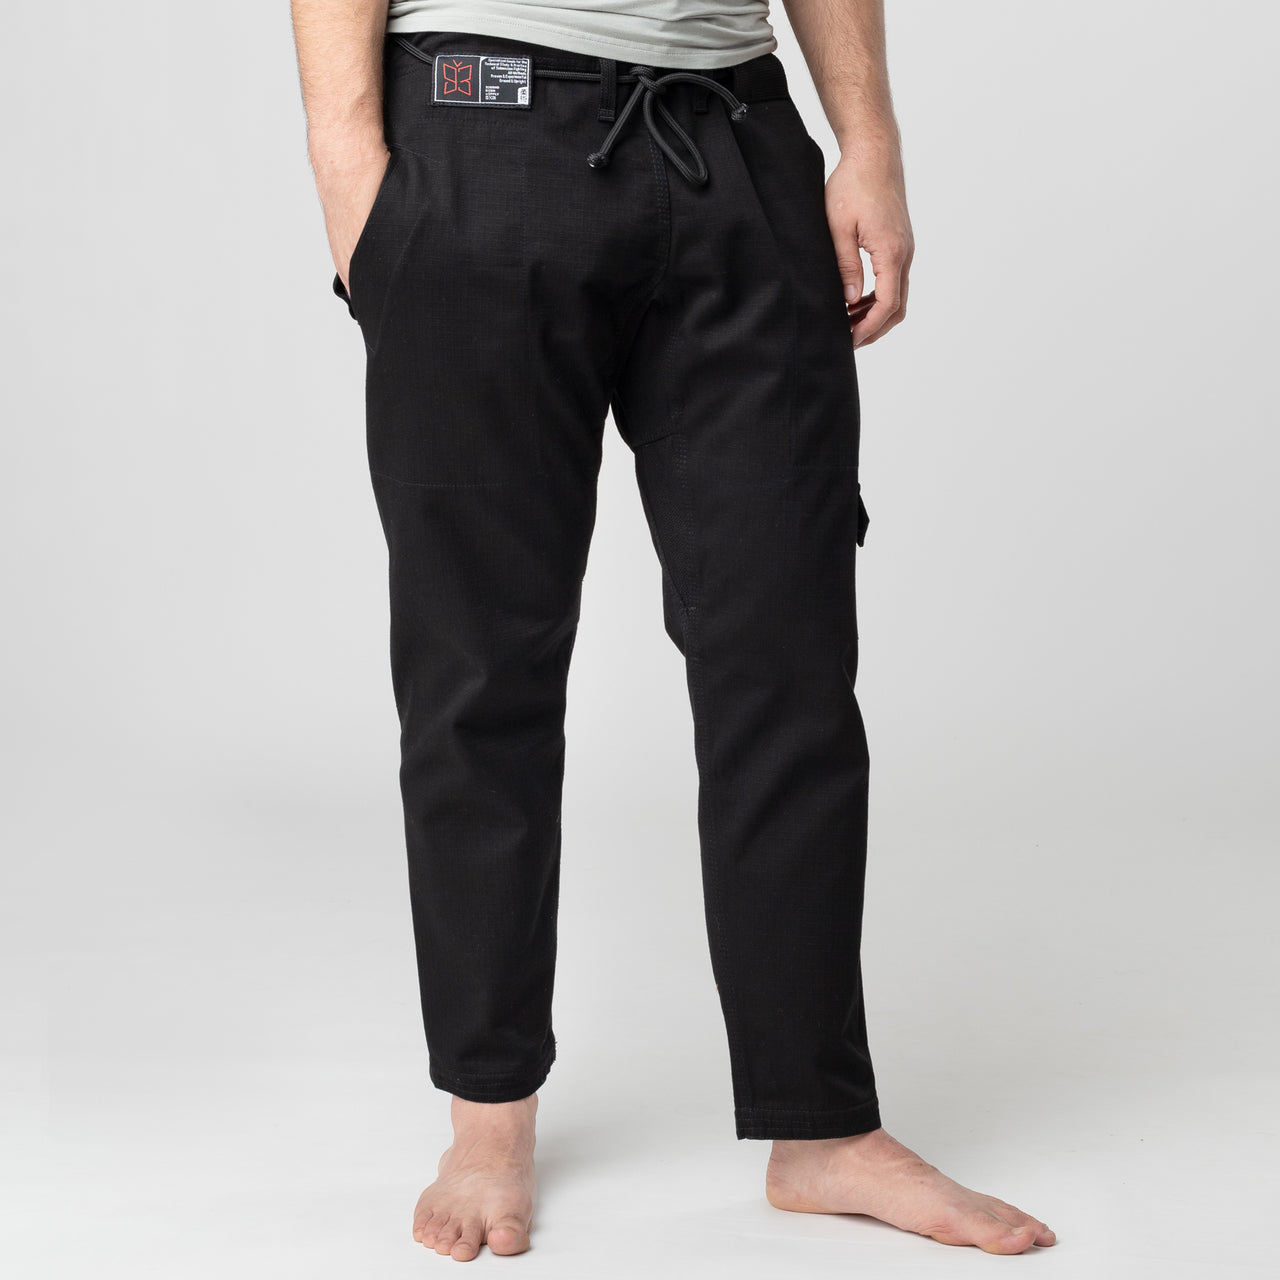 93brand Butterfly Originals Casual Gi Pants - Black